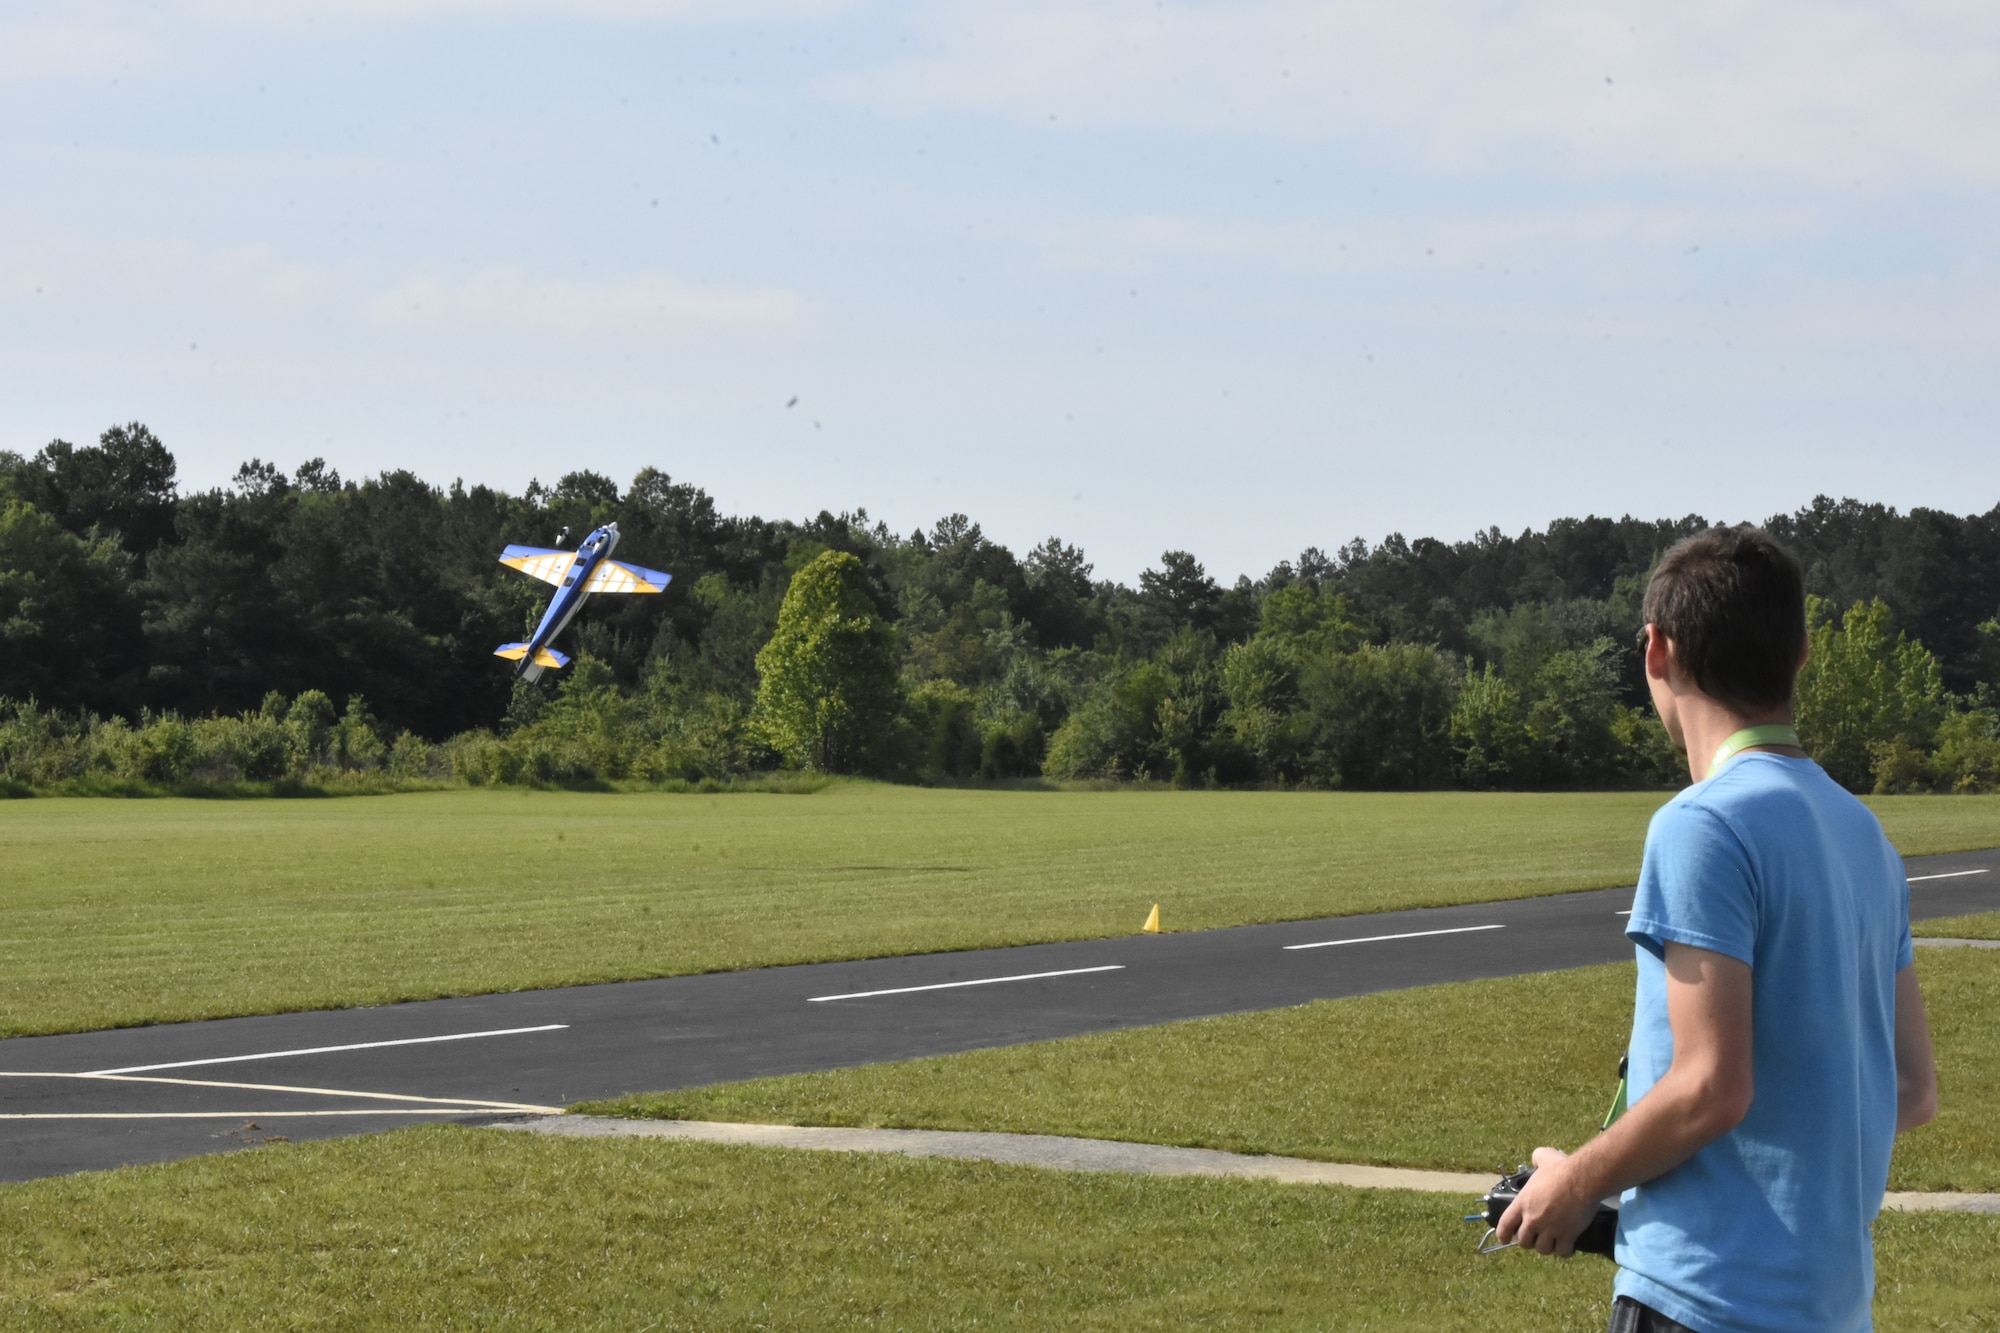 Nicholas Amelang puts on an RC aerobatics demonstration during a June 26, 2021, event hosted by the Coffee Airfoilers Model RC Club to coincide with the Arnold Engineering Development Complex 70th anniversary celebration at Arnold Air Force Base, Tenn. (U.S. Air Force photo by Bradley Hicks)